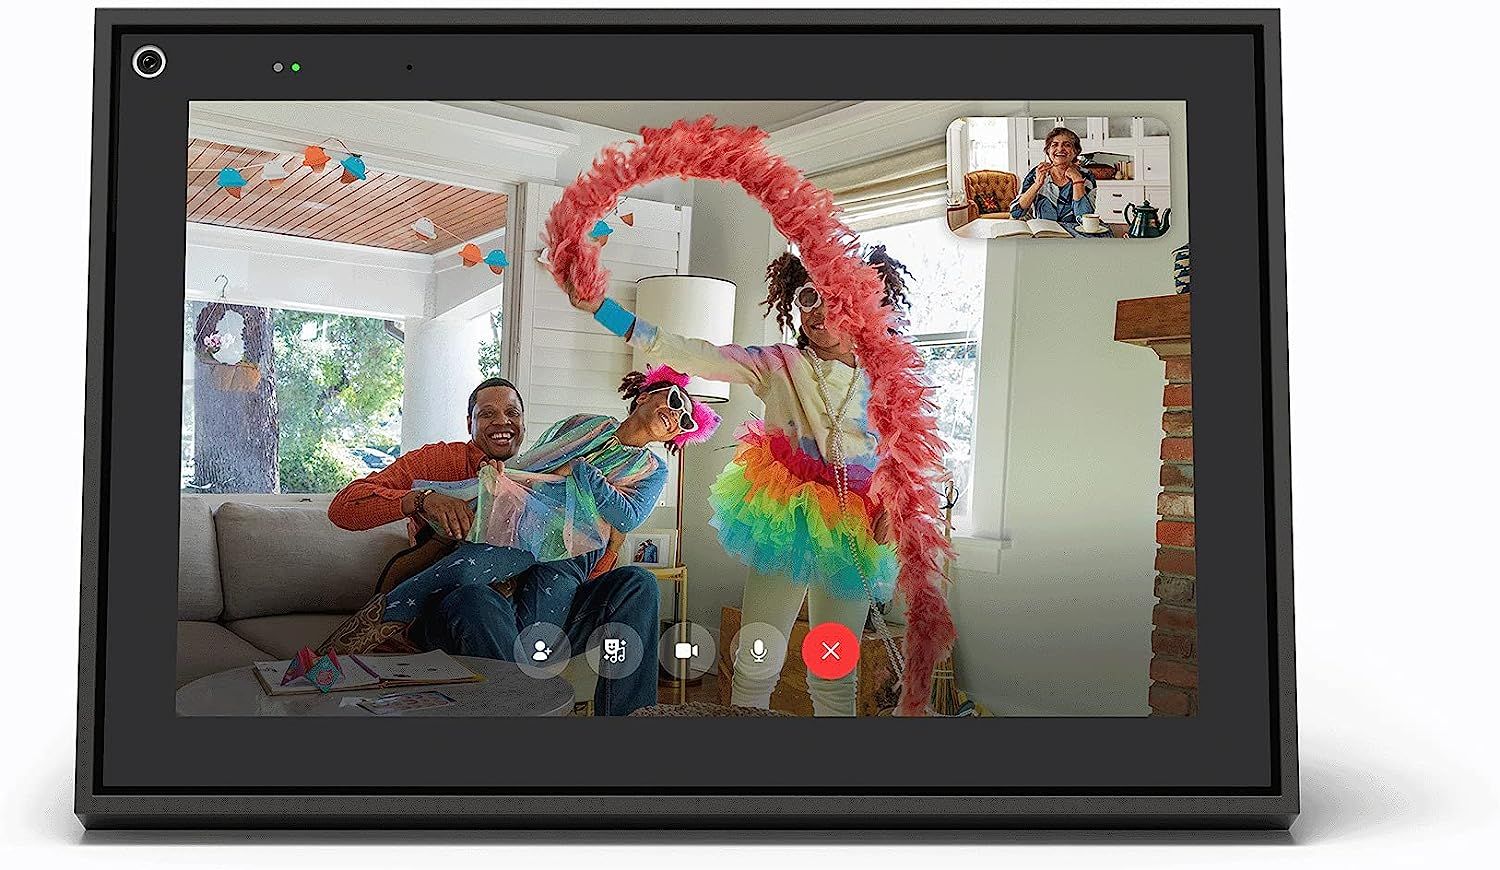 Facebook Portal - Smart Video Calling 10” Touch Screen Display with Alexa - Black | Amazon (US)